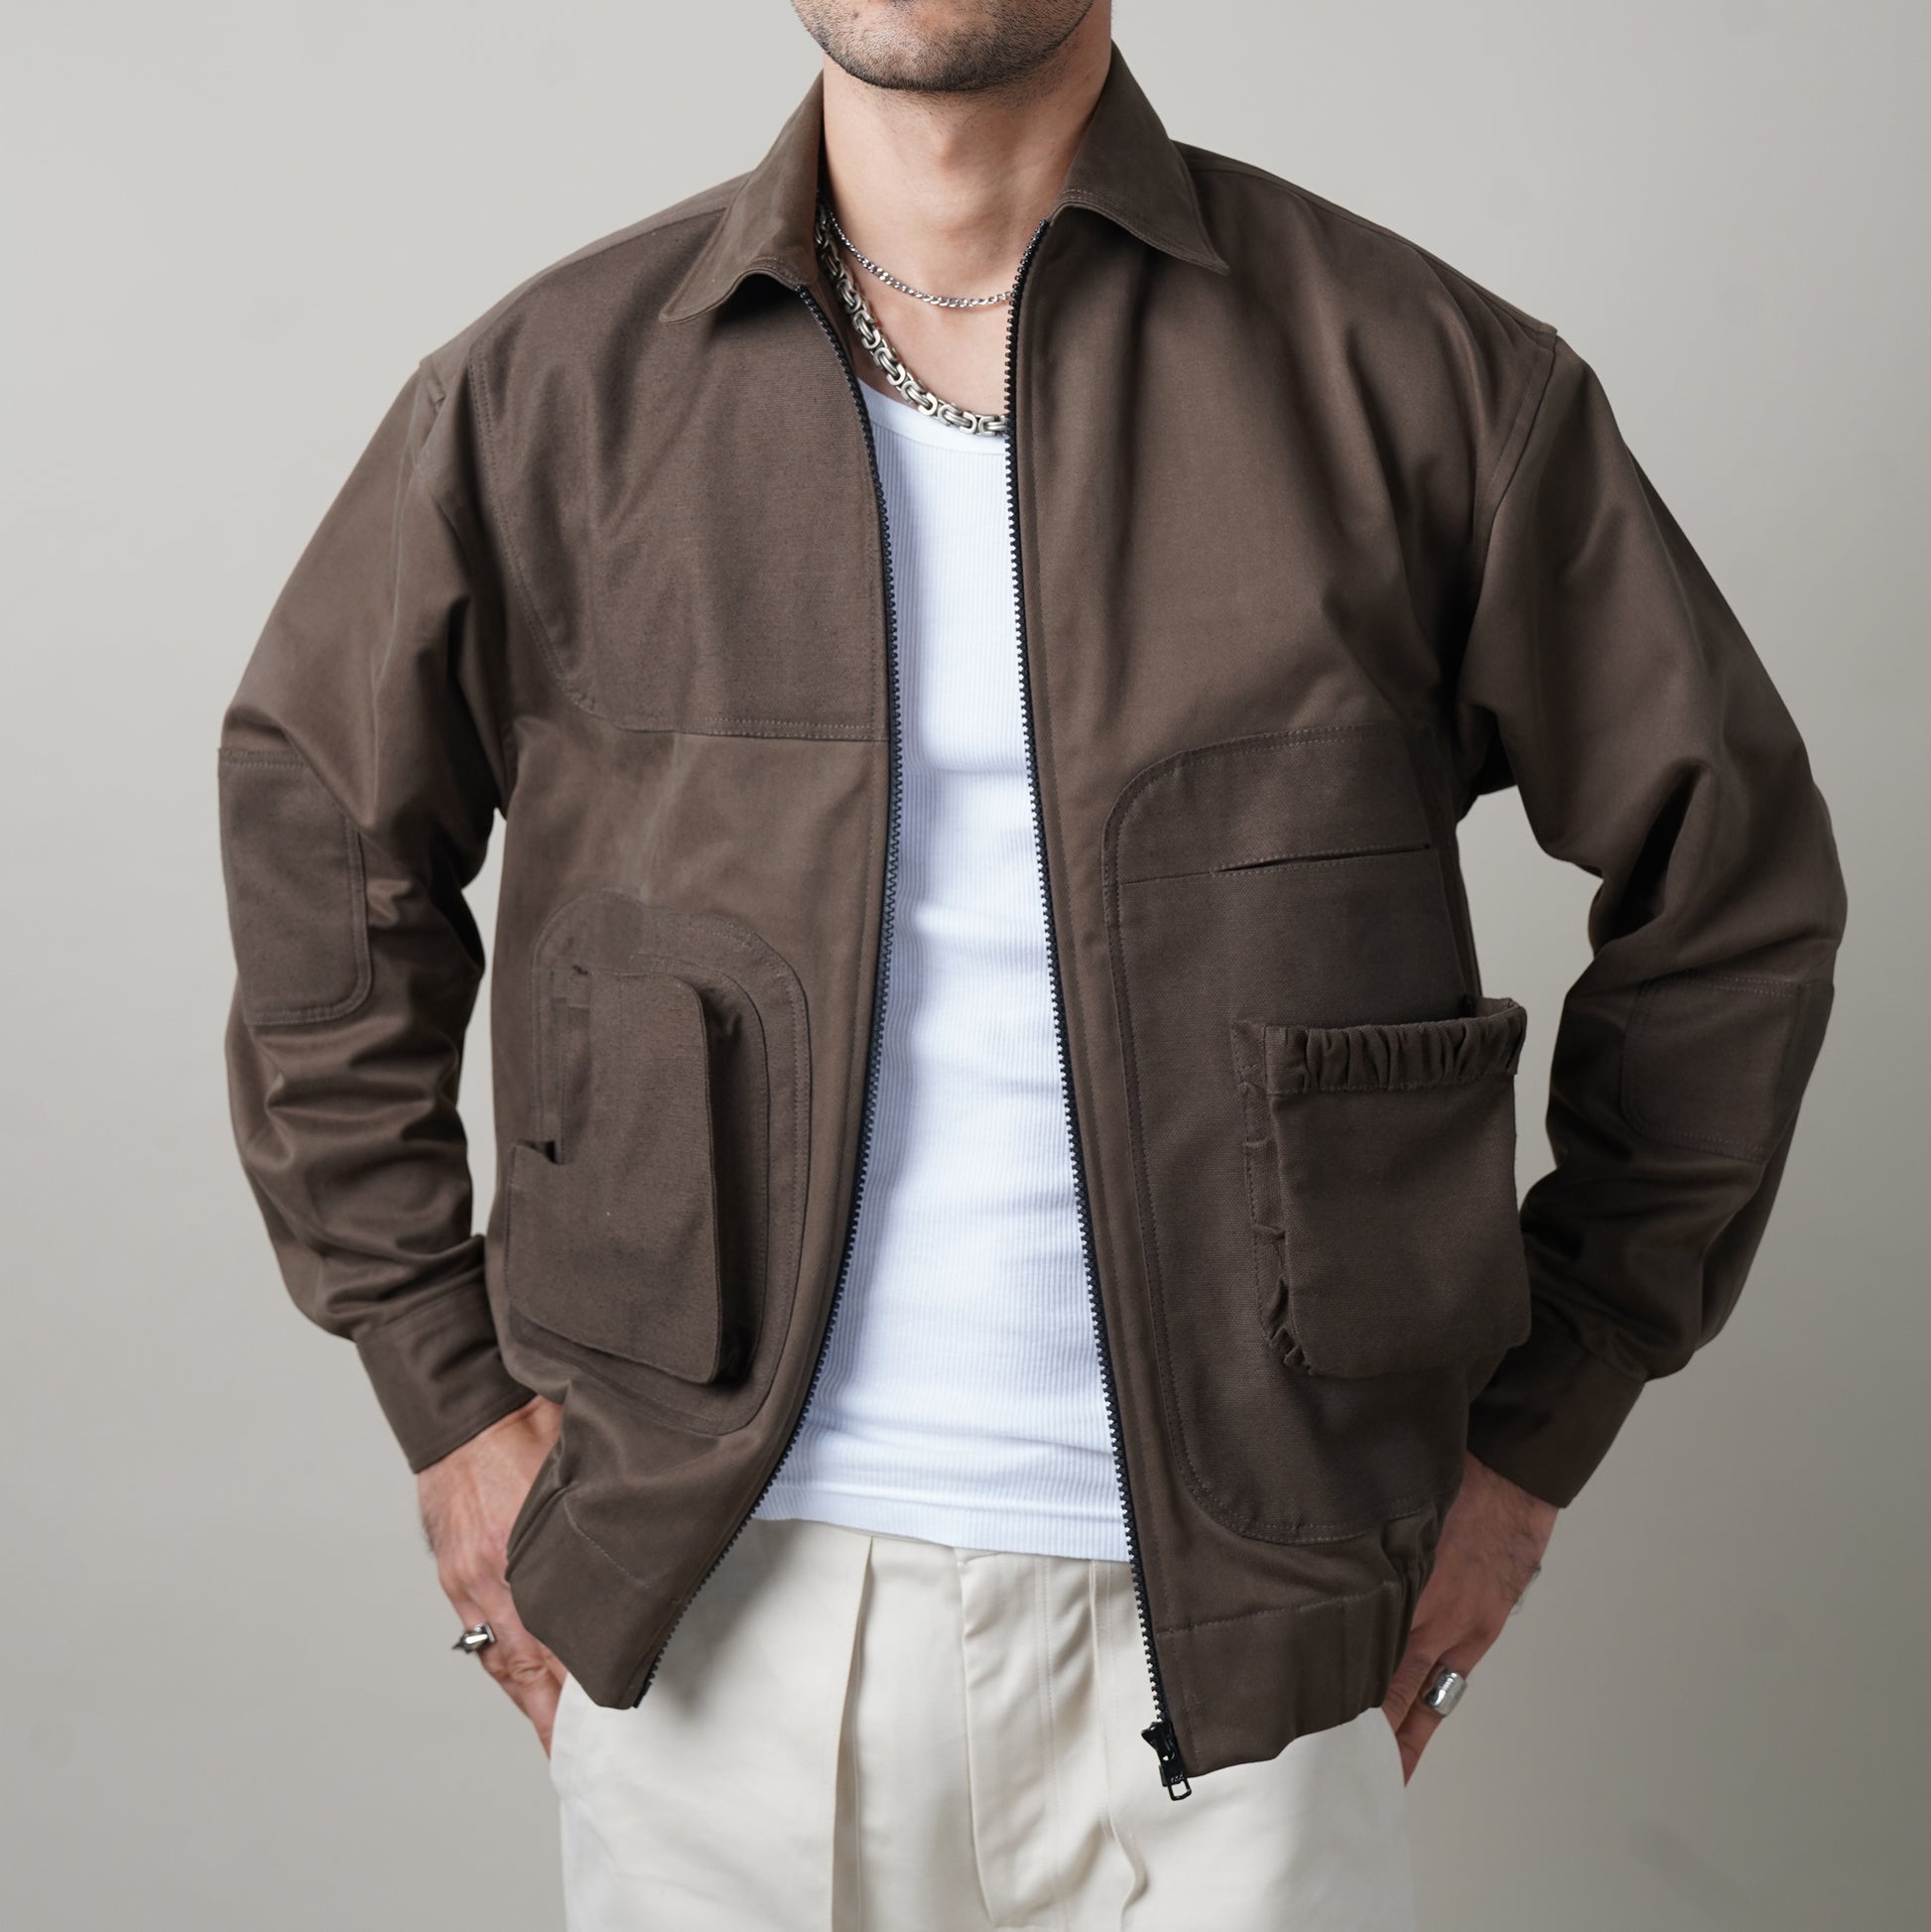 BOMBER JACKET, ONE OF ONE, 3D POCKETS, MENS FASHION, MENS JACKETS, HEAVYWEIGHT FABRIC, ONE PIECE COLLAR, 100% EGYPTIAN GIZA COTTON, MENS APPAREL, FALL/ WINTER, OUT FIT INSPIRATION, JACKETS, BROWN BOMBER JACKETS, people also ask 